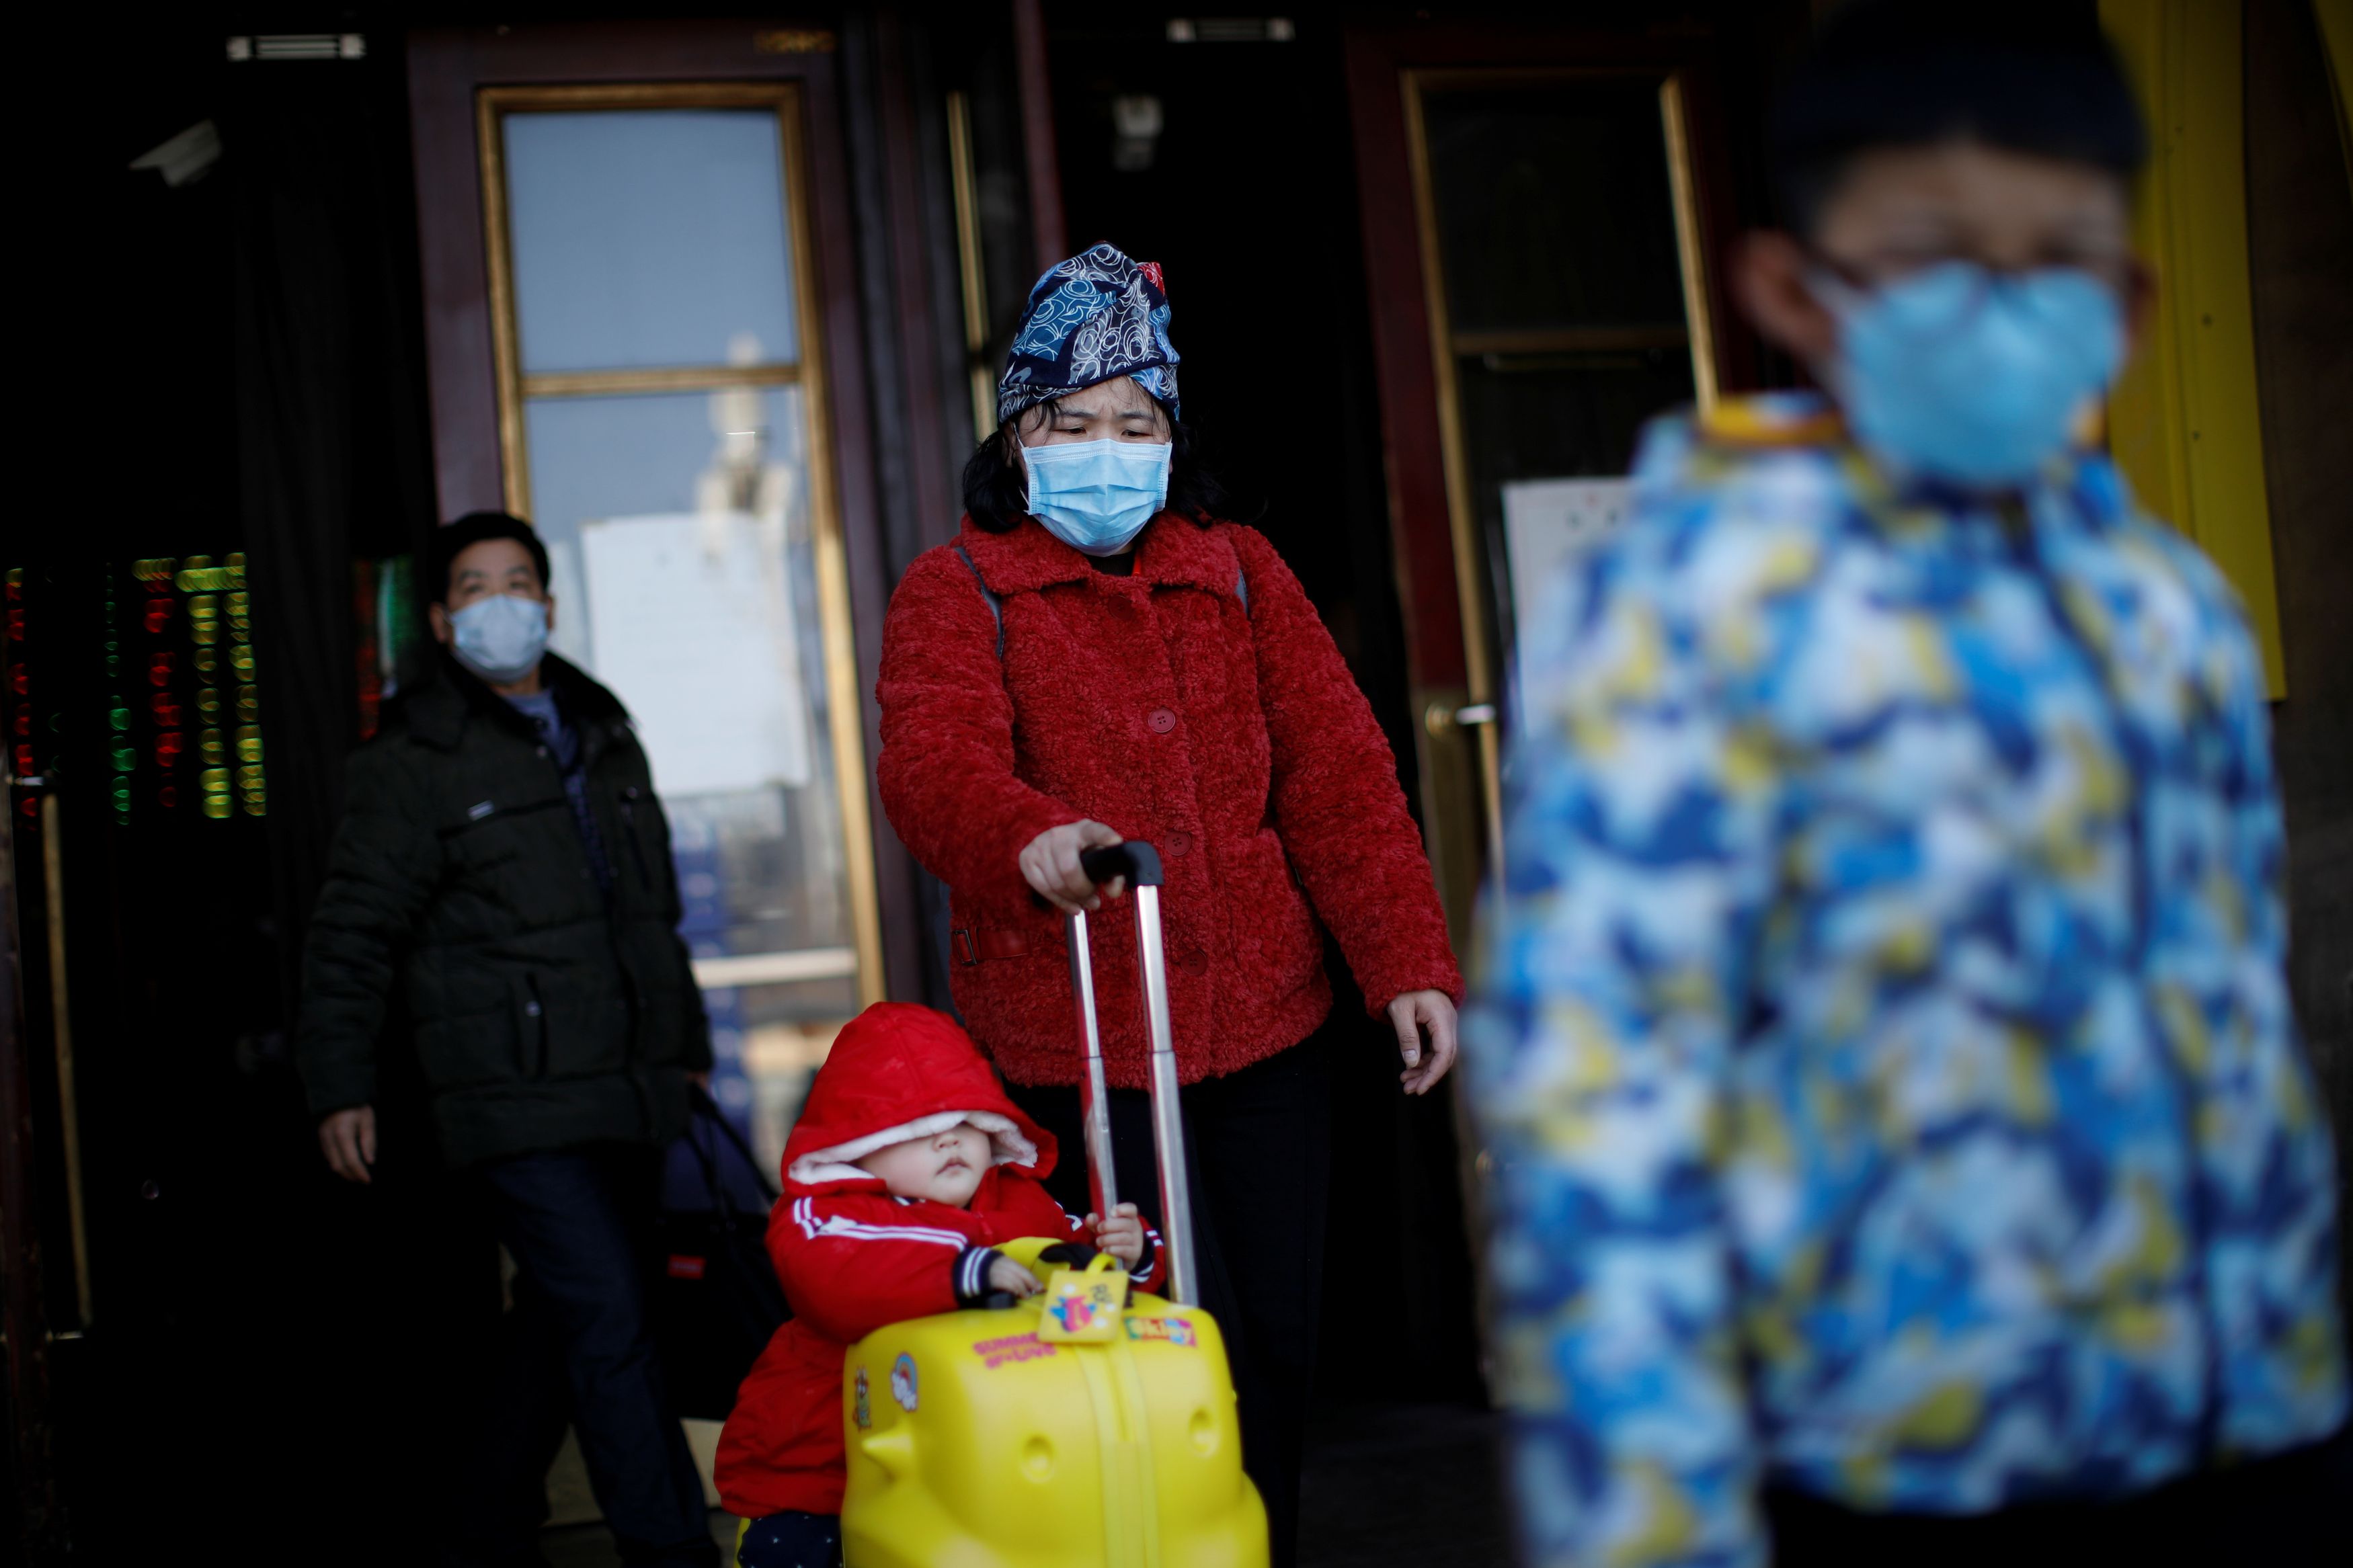 People wearing face masks carry their luggage as they walk outside Beijing Railway Station as the country is hit by an outbreak of the new coronavirus, in Beijing